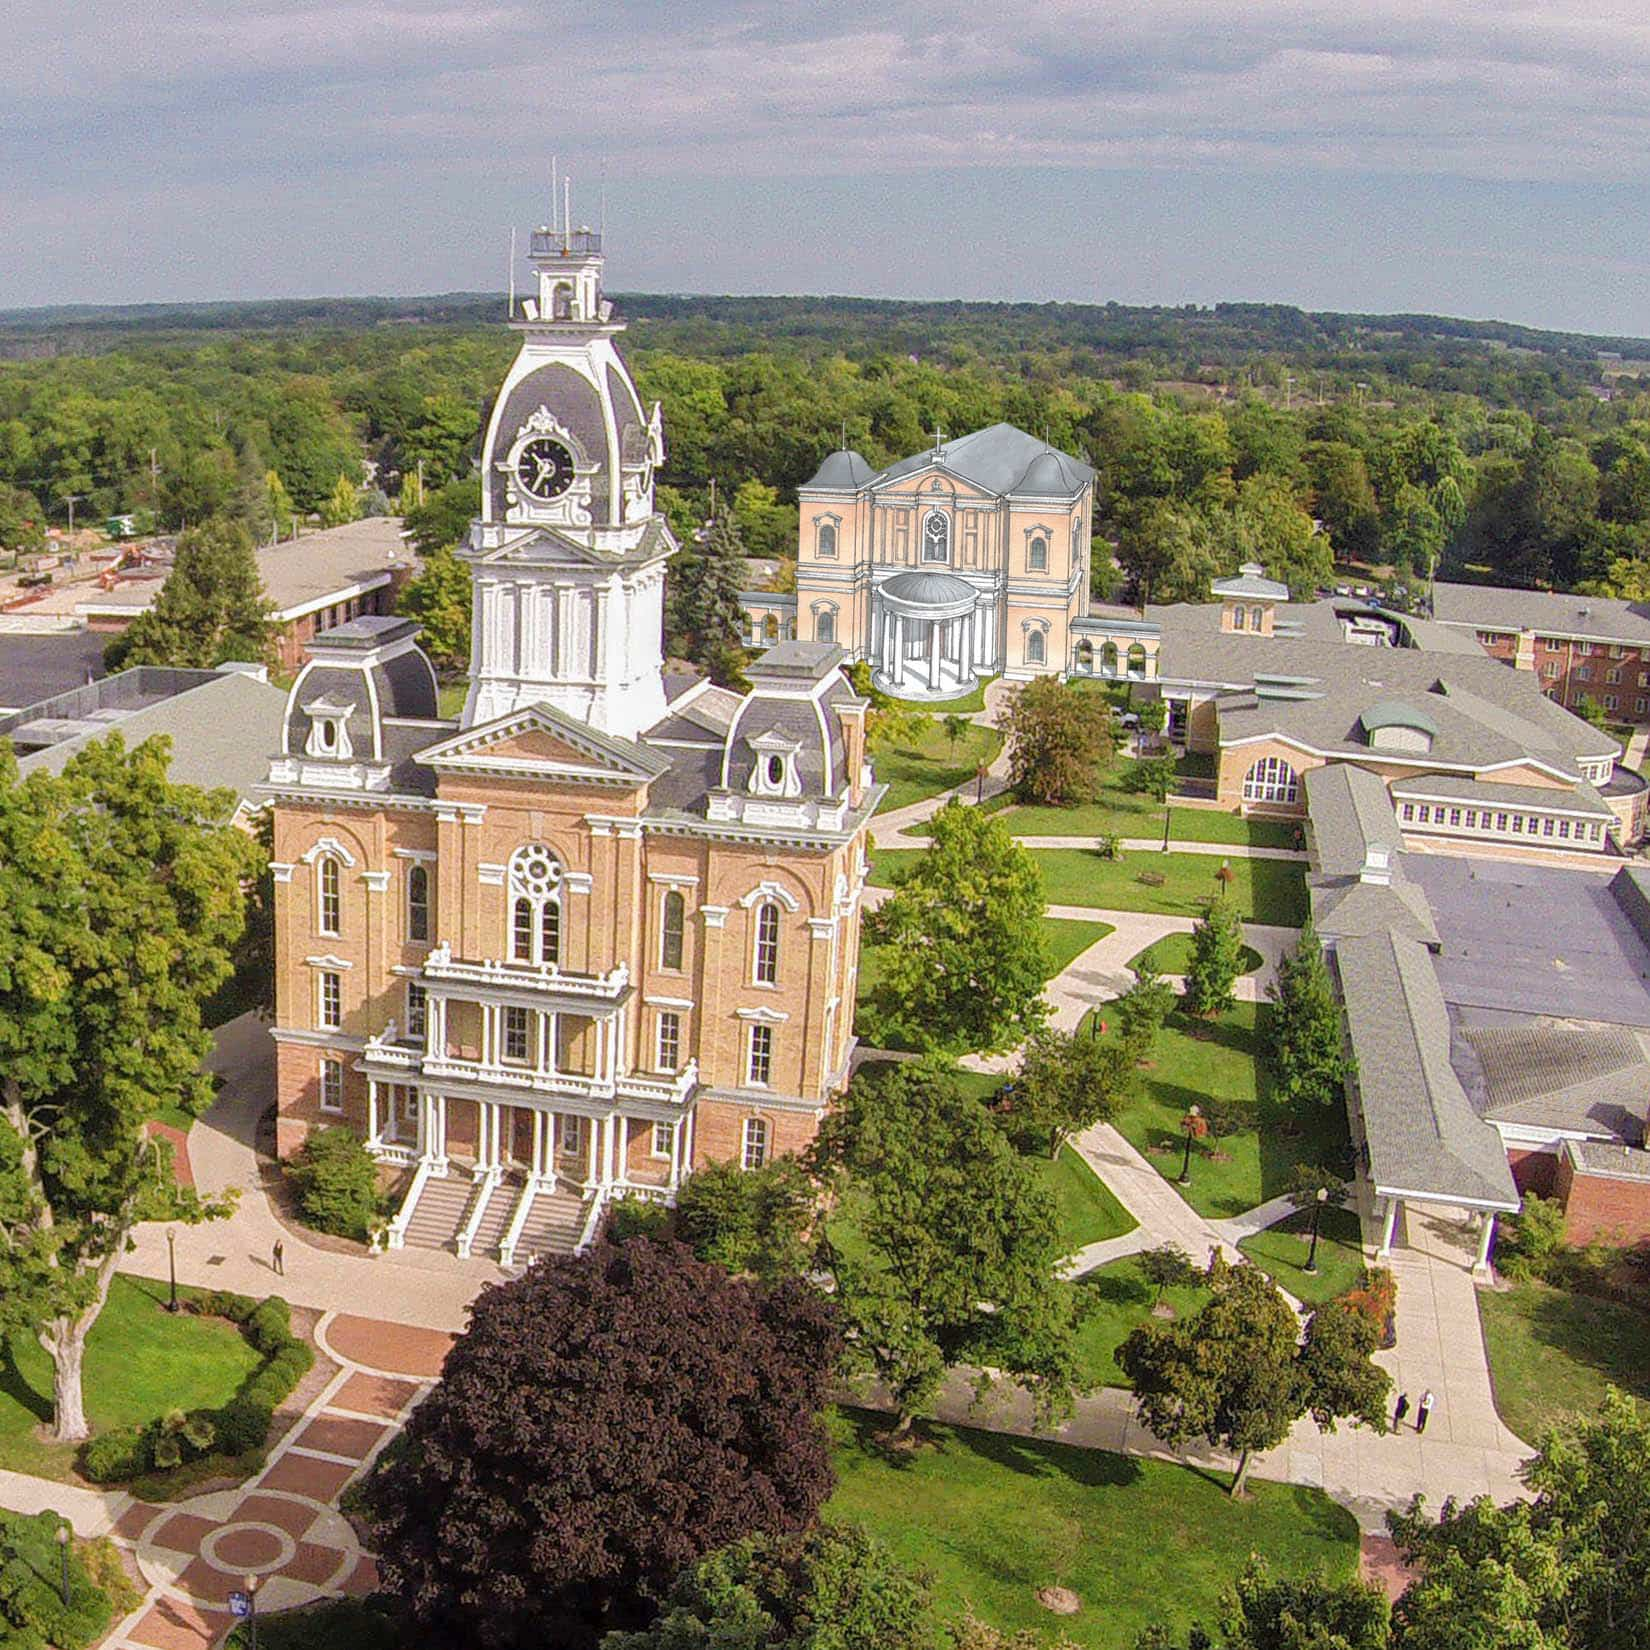 A thumbnail image of the Hillsdale College campus showing its administration building and chapel.